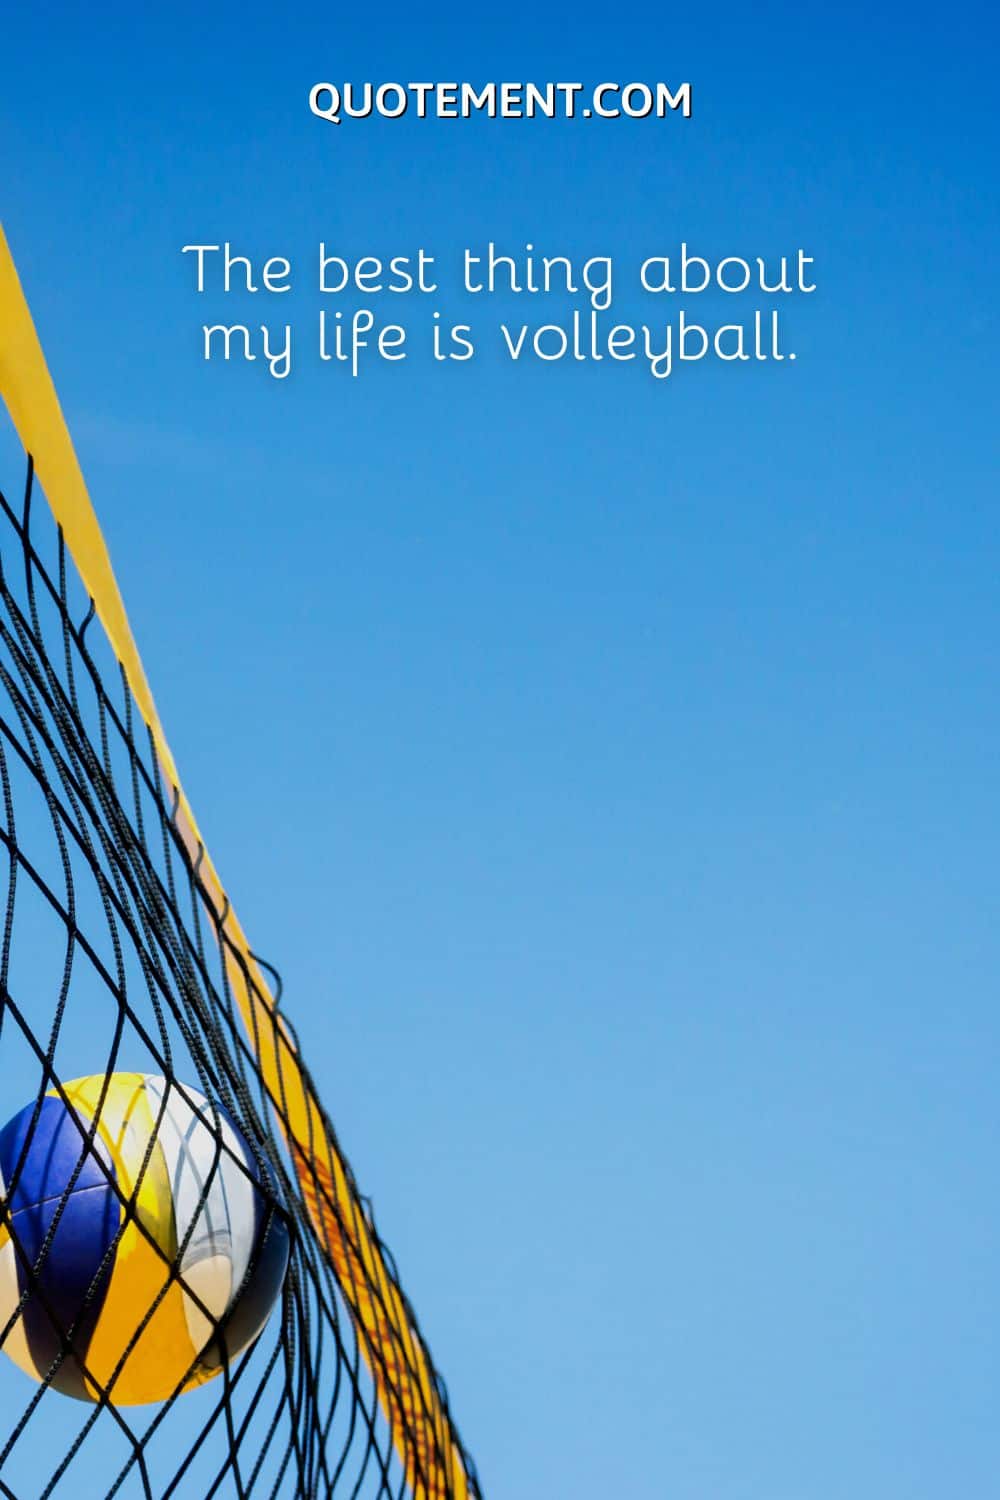 The best thing about my life is volleyball.